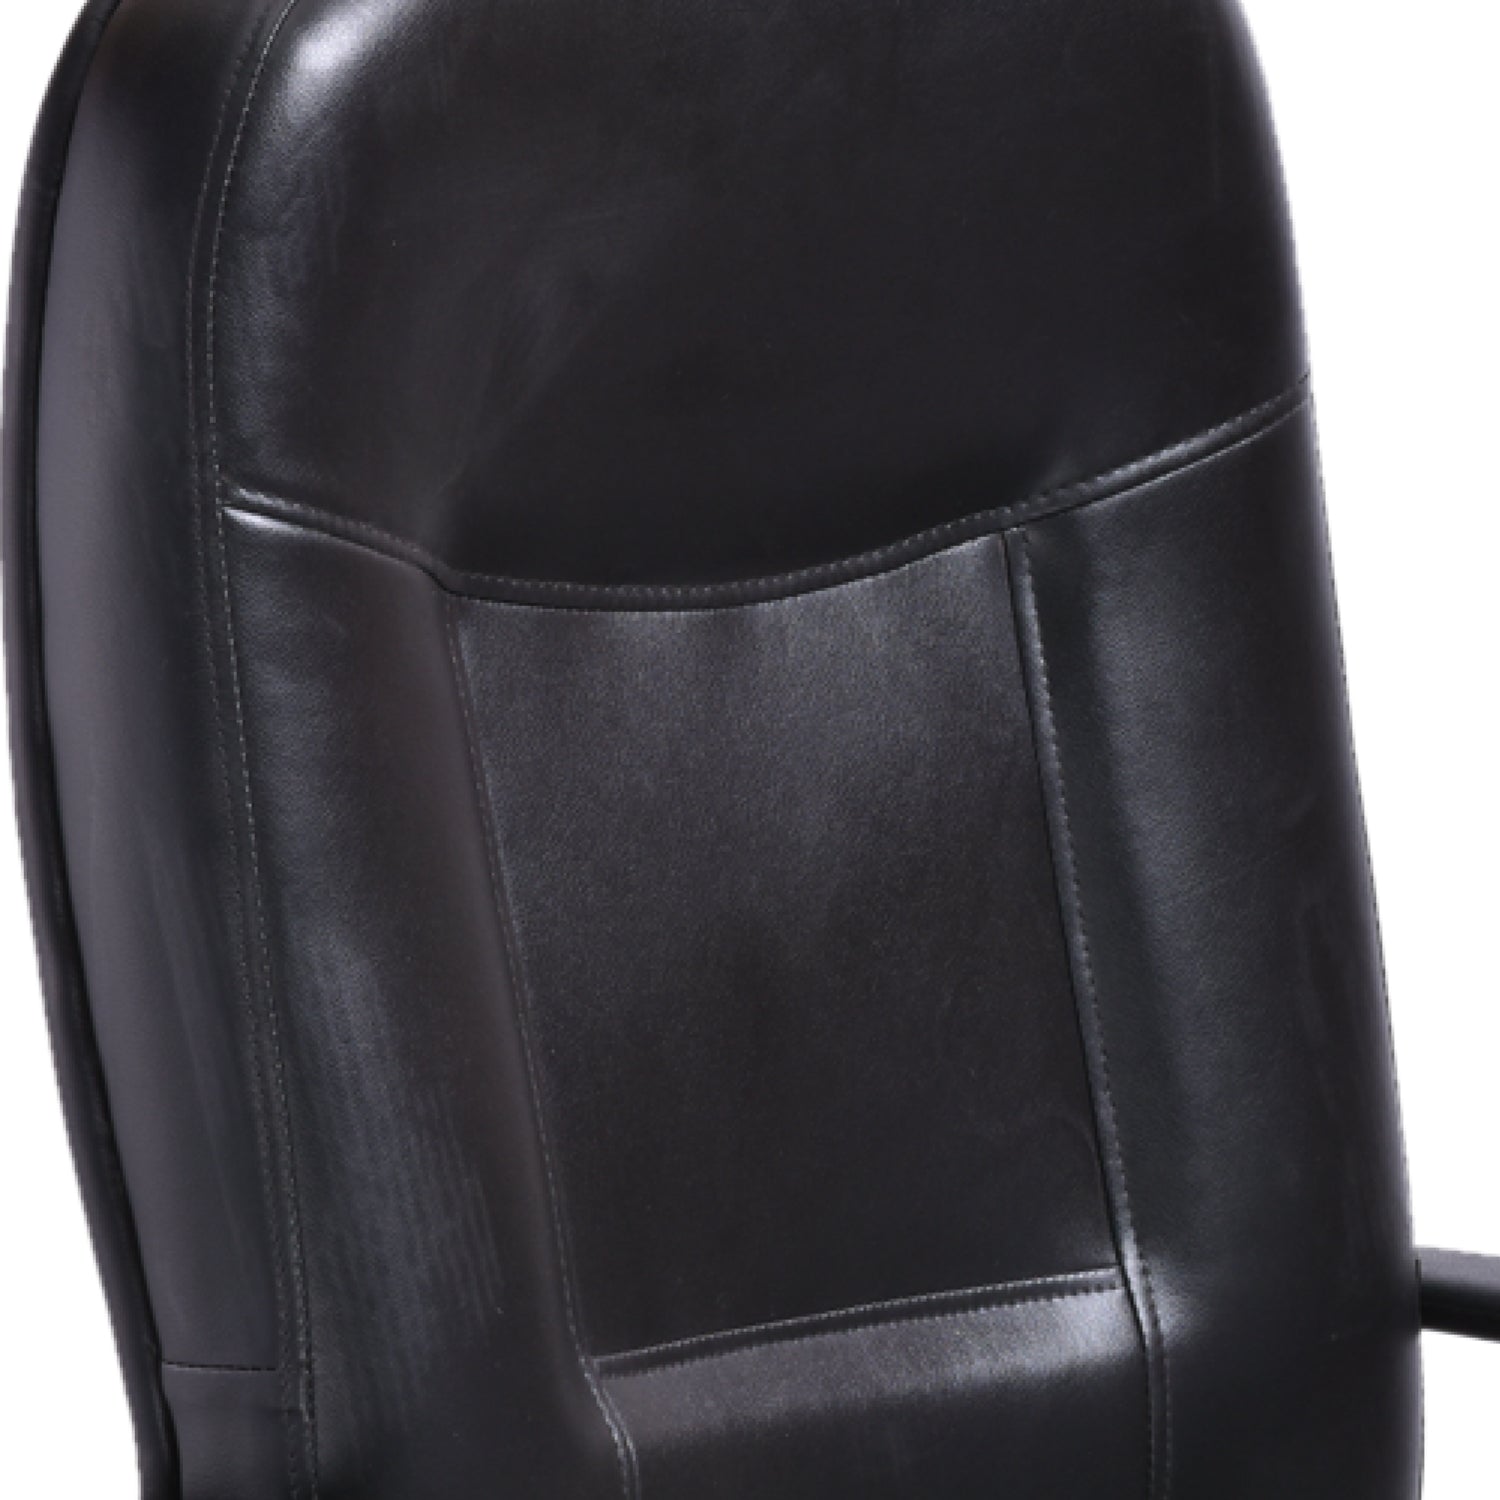 ZSE1043 High Back Chair by Zorin in Black Color Zorin